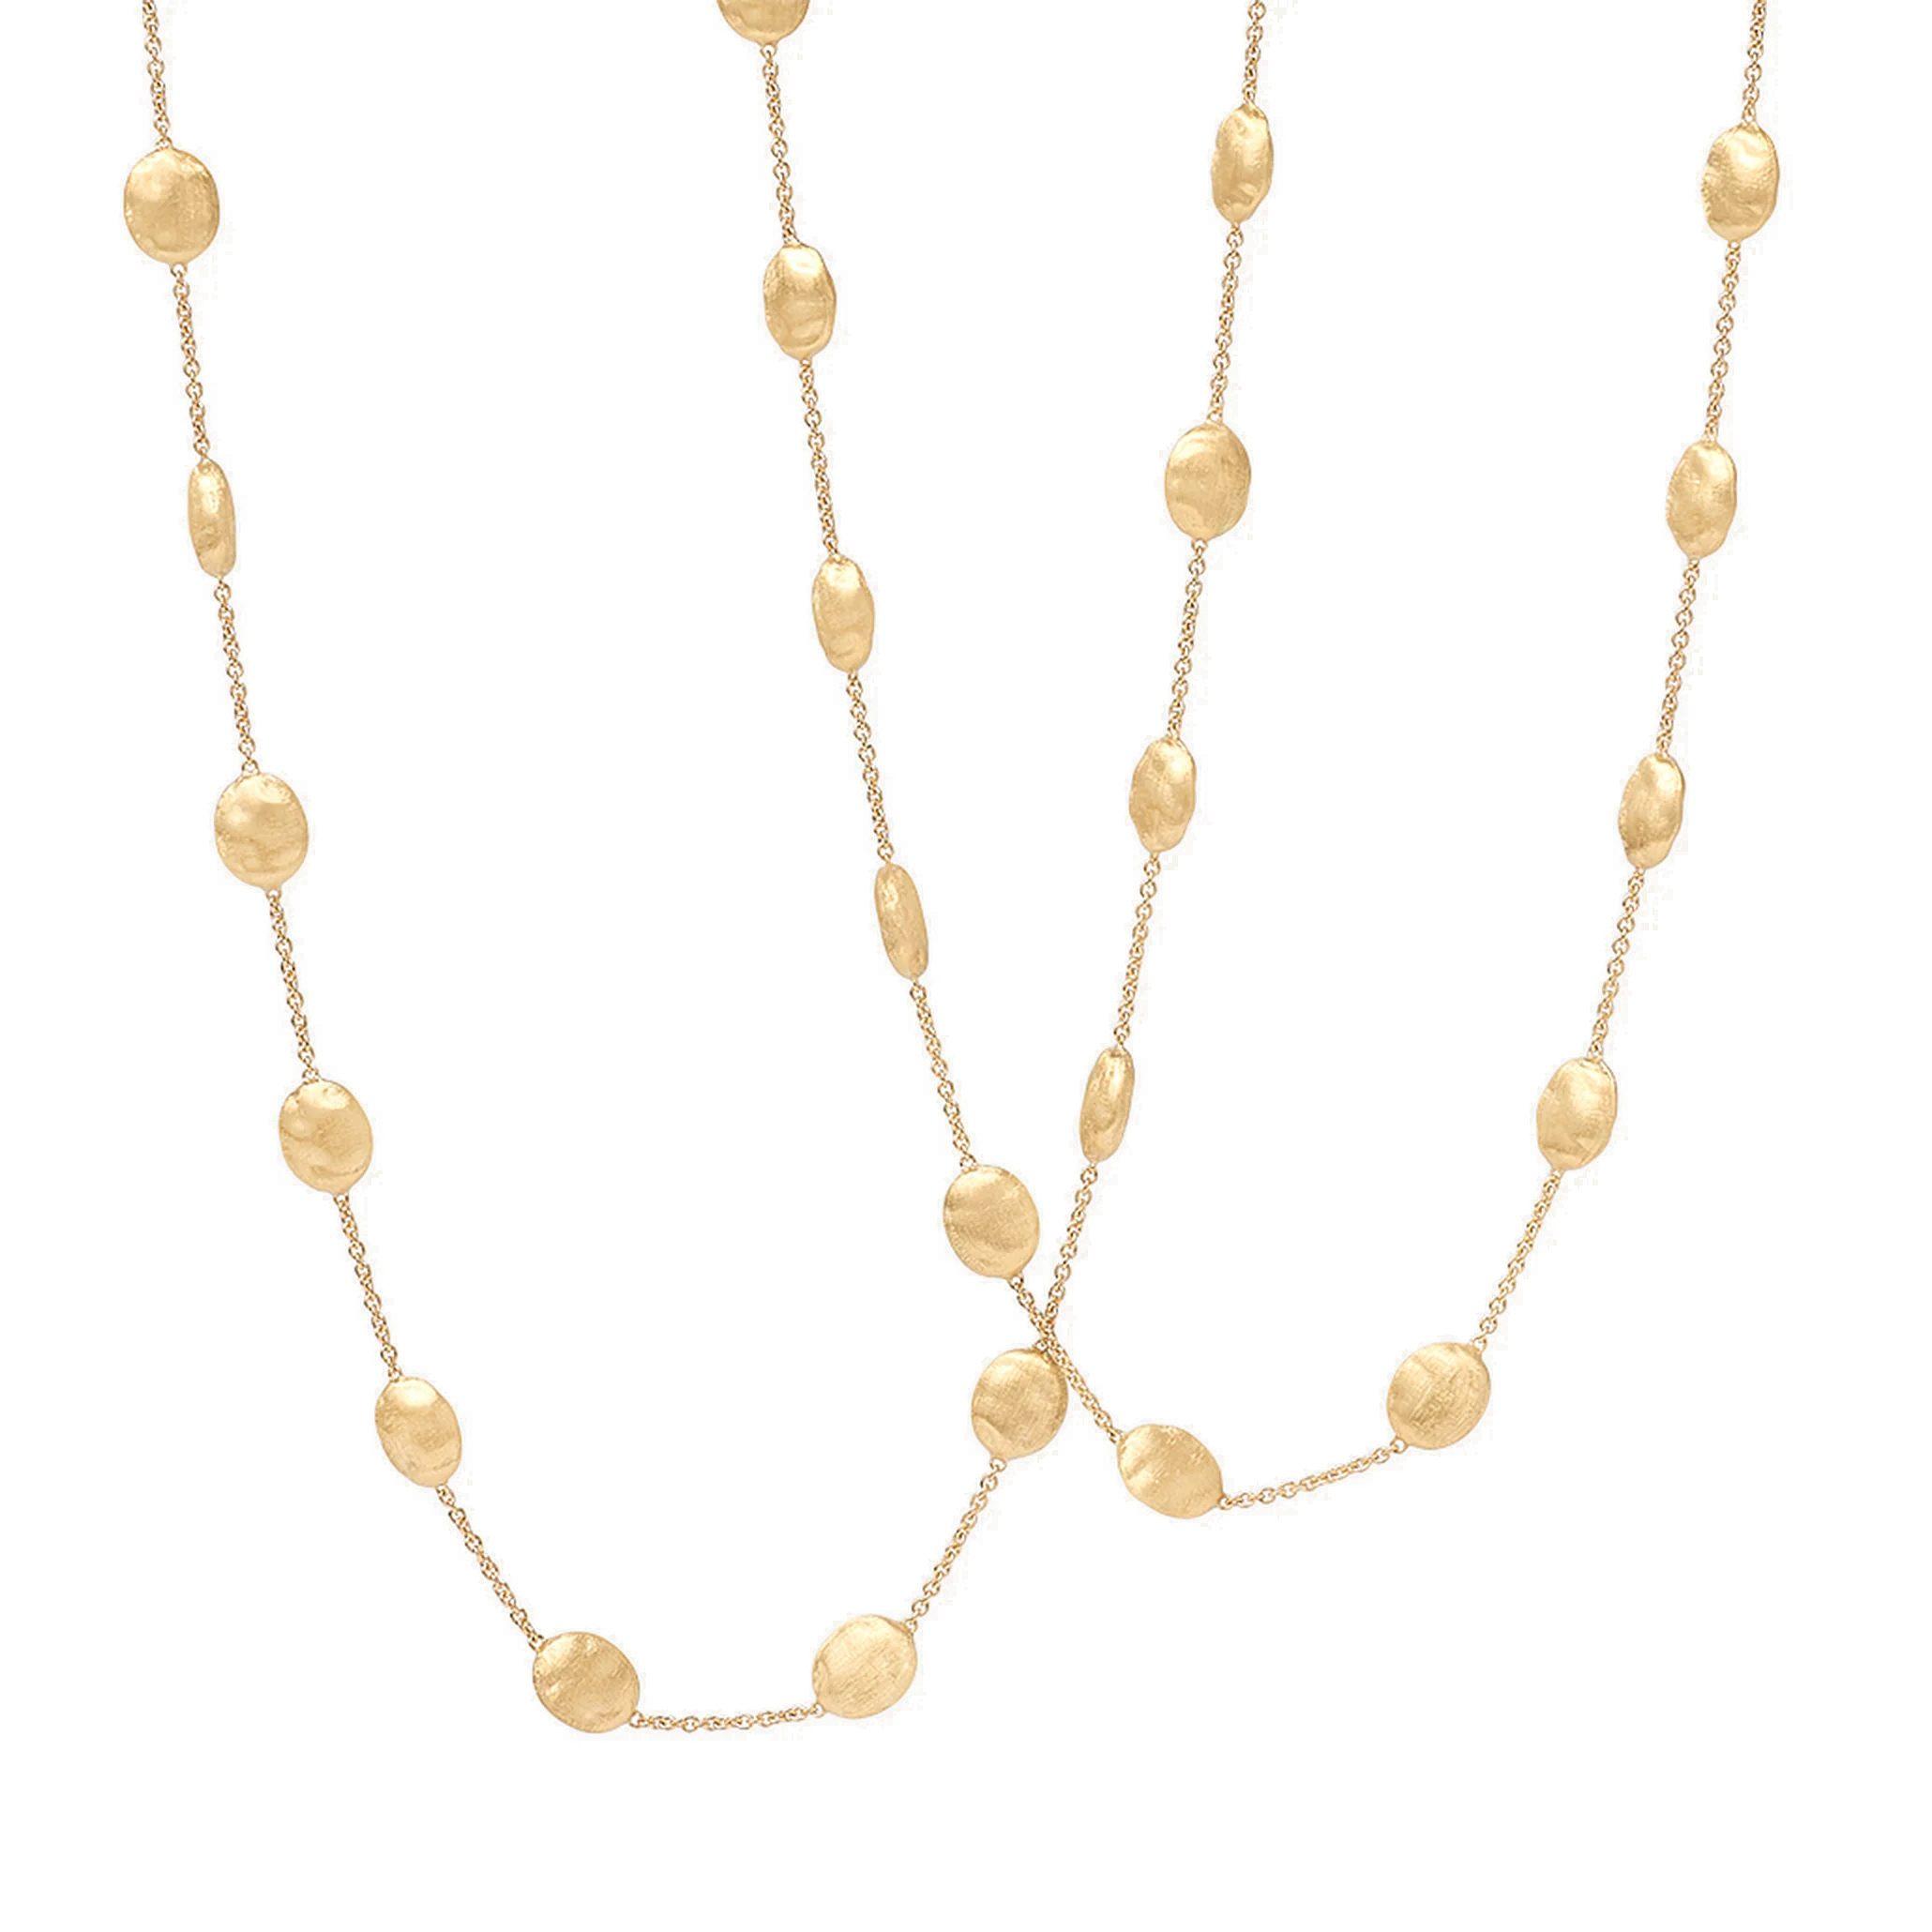 Marco Bicego Siviglia Large Bean Station Necklace, 36 inches 4